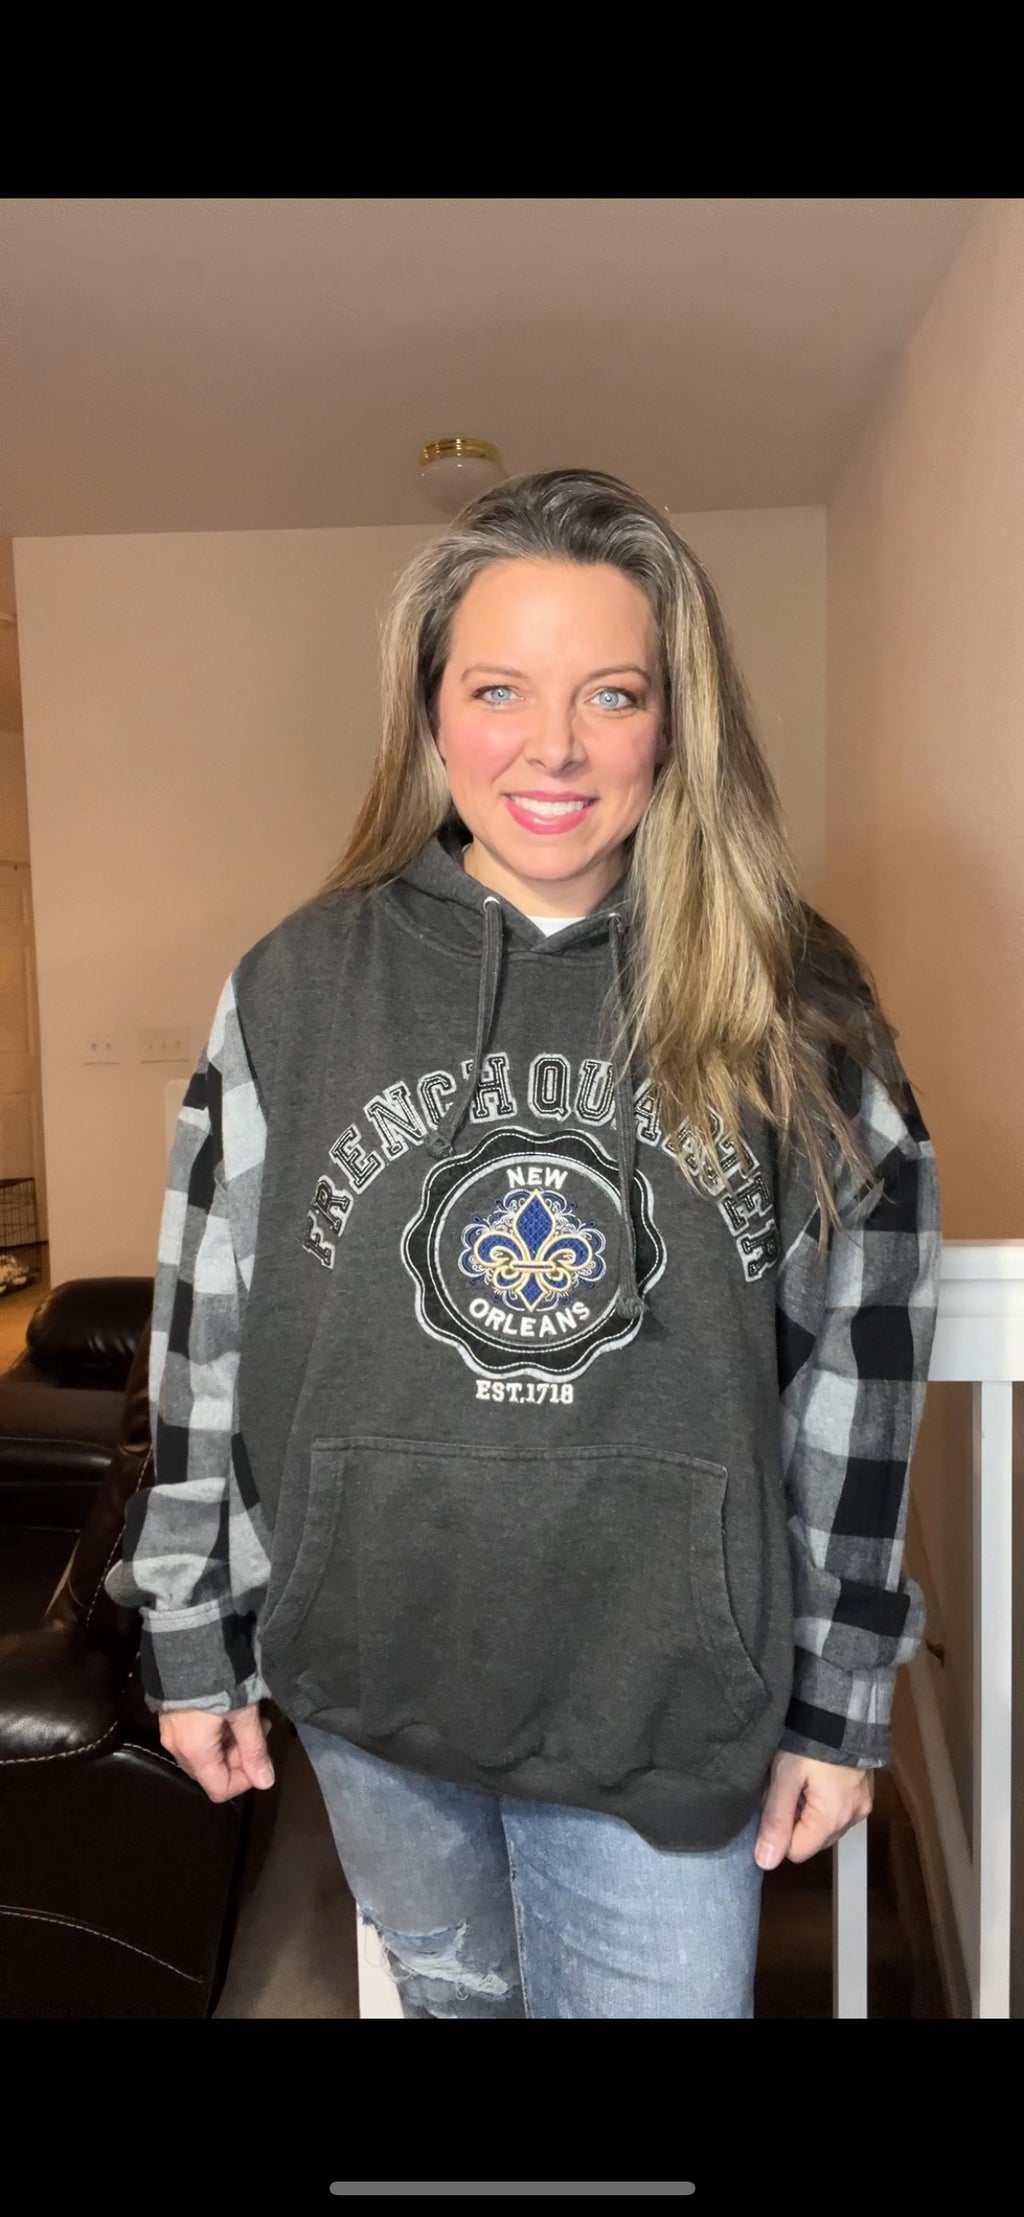 Upcycled New Orleans – women’s one X – soft fix sweatshirt with flannel sleeves